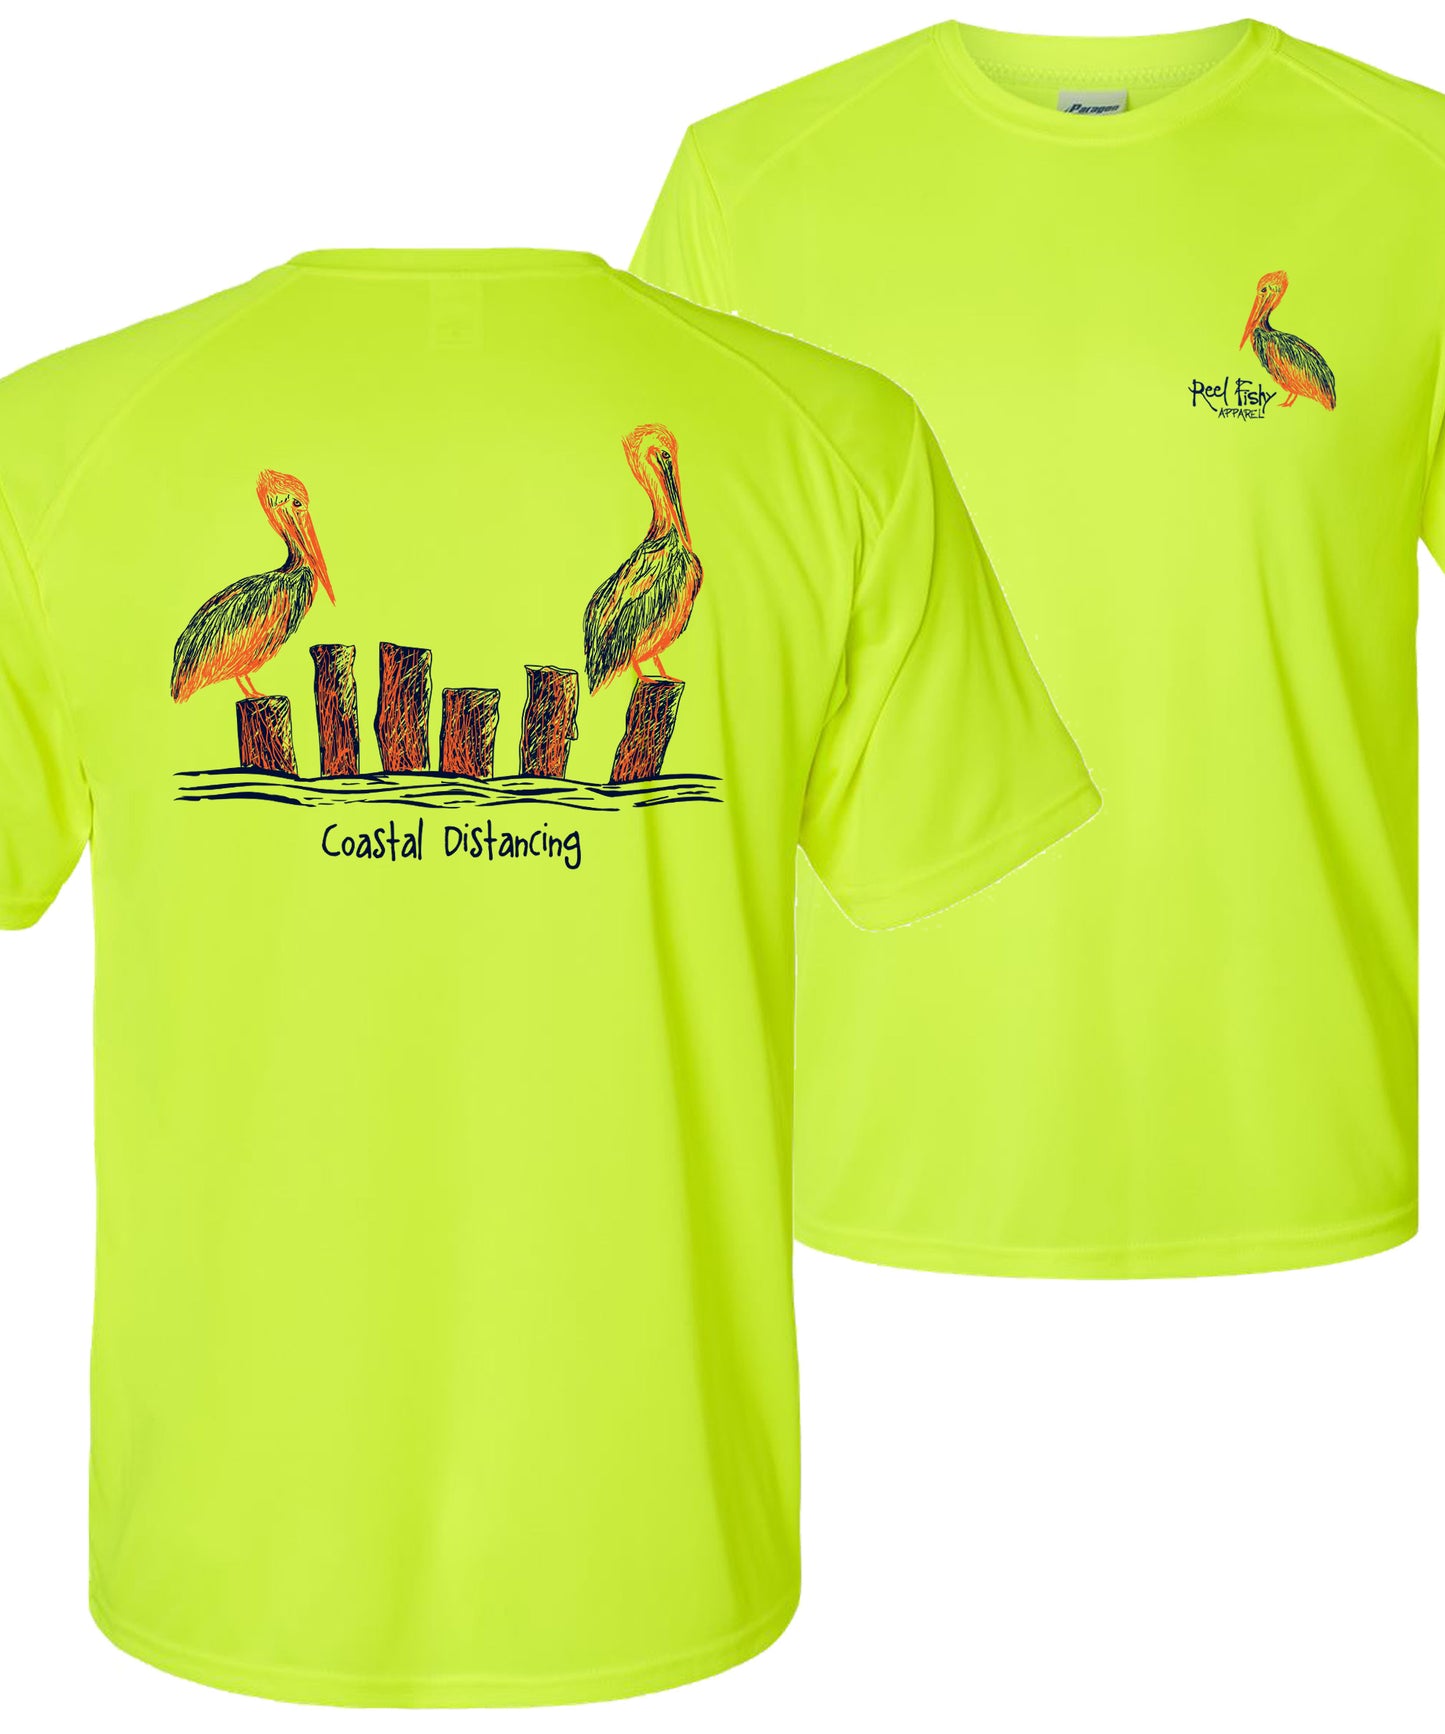 Pelicans Coastal Distancing Performance Dry-fit Neon Yellow Short Sleeve Shirts